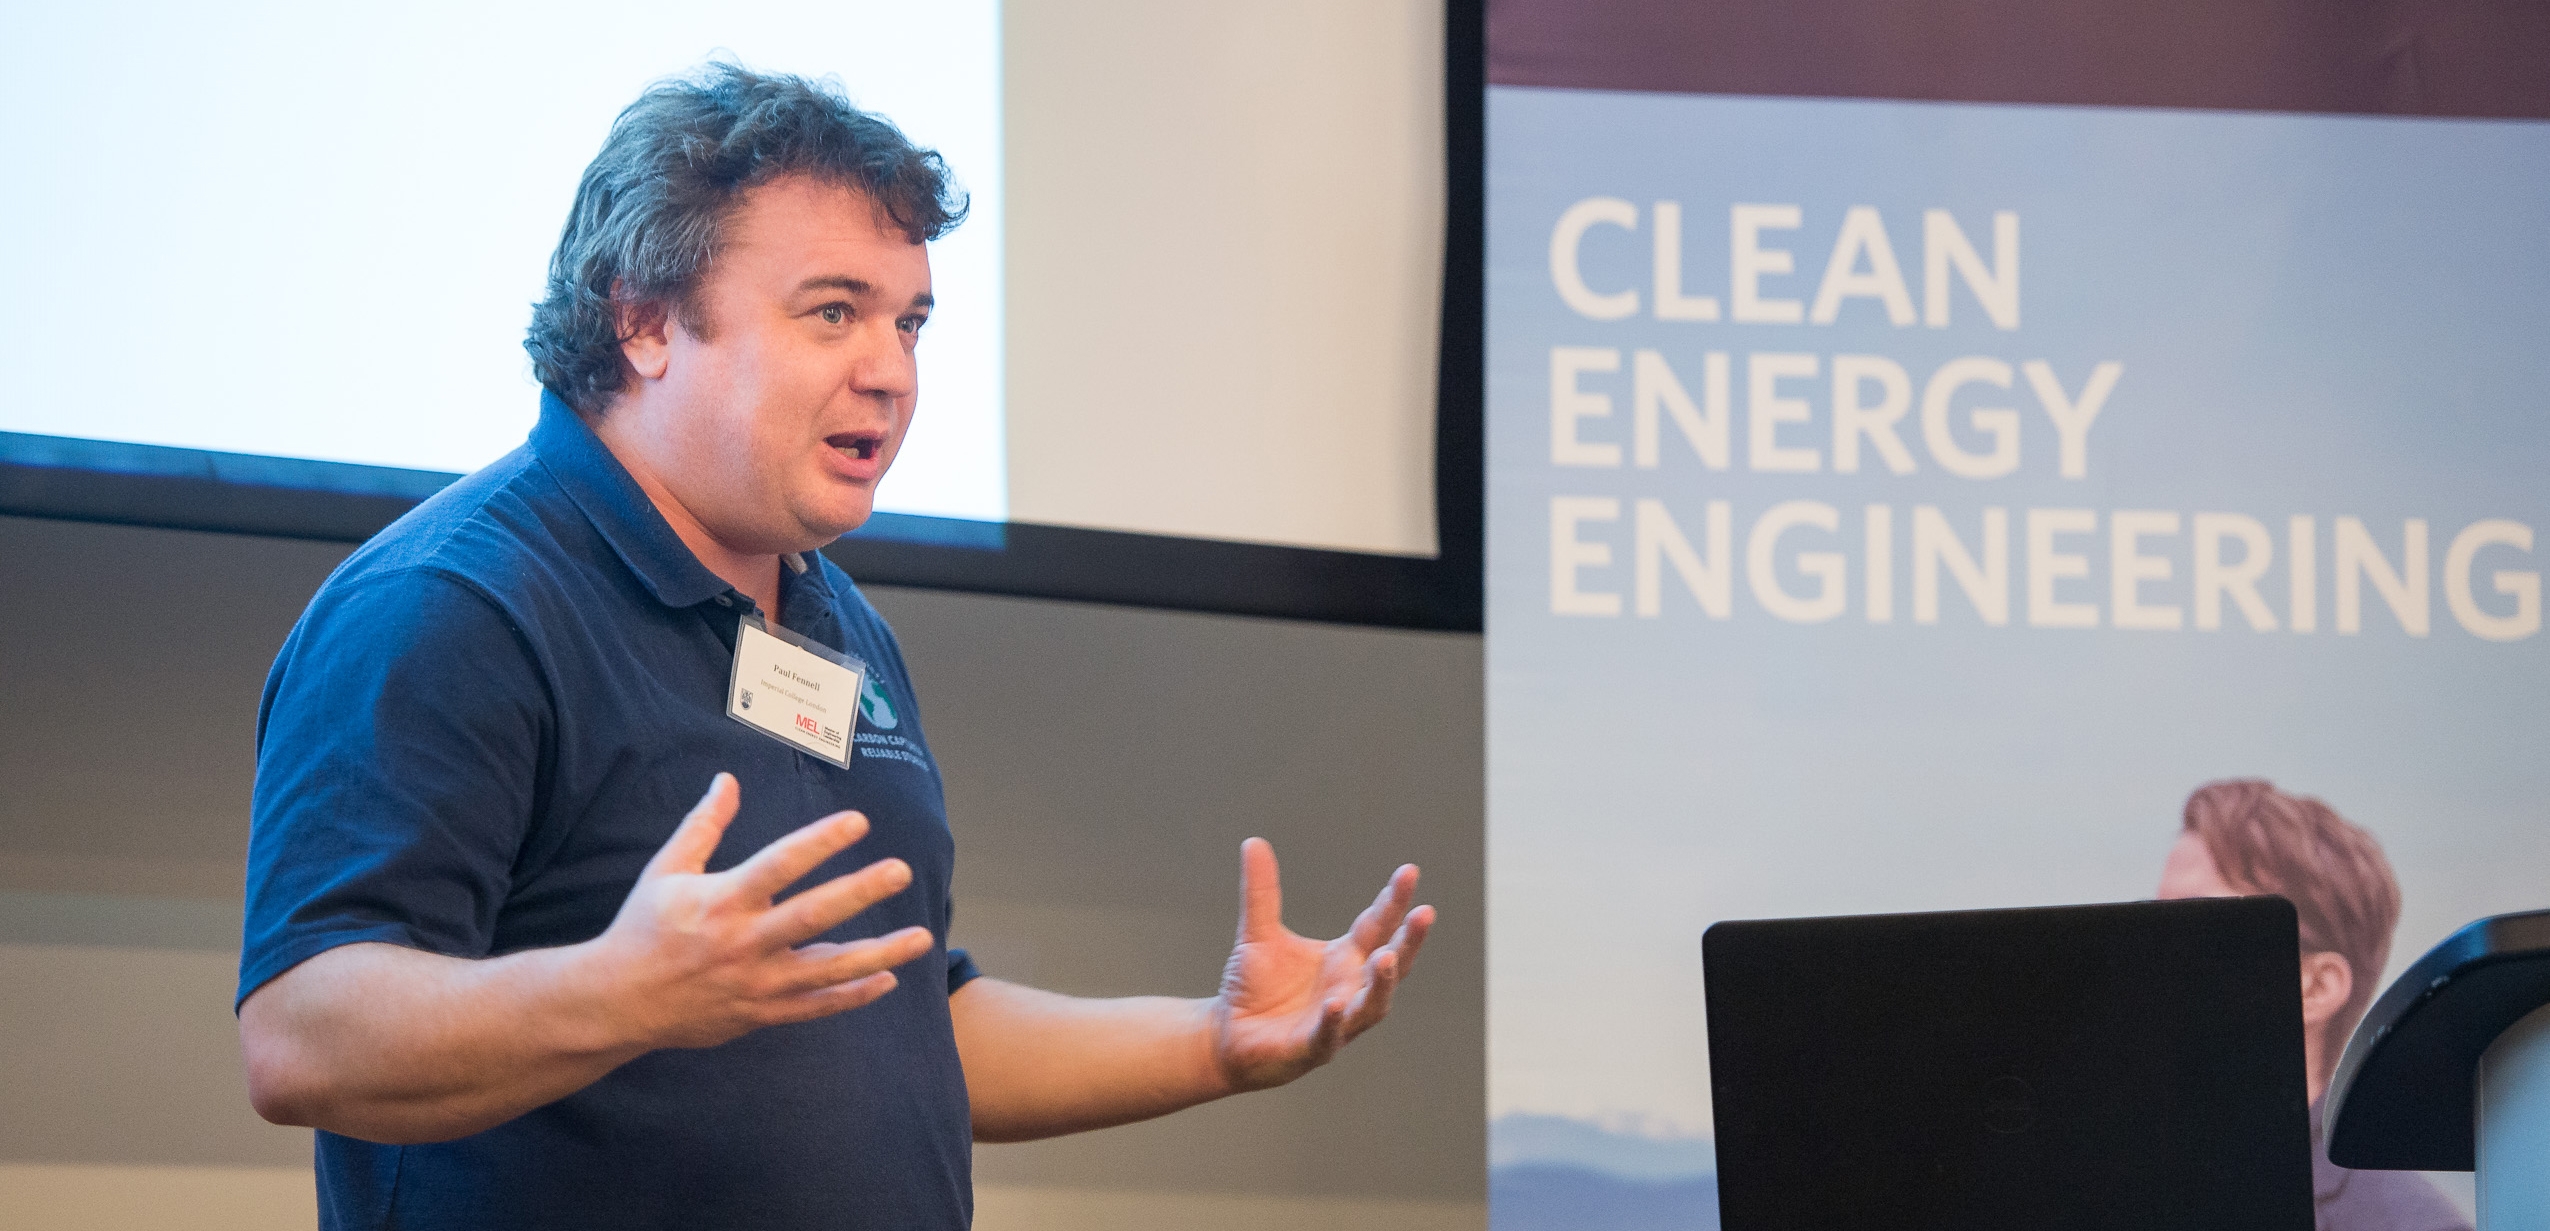 MEL in Clean Energy Engineering Capstone Showcase Event December 2017_Dr. Paul Fennell, Professor of Clean Energy at the Imperial College in London